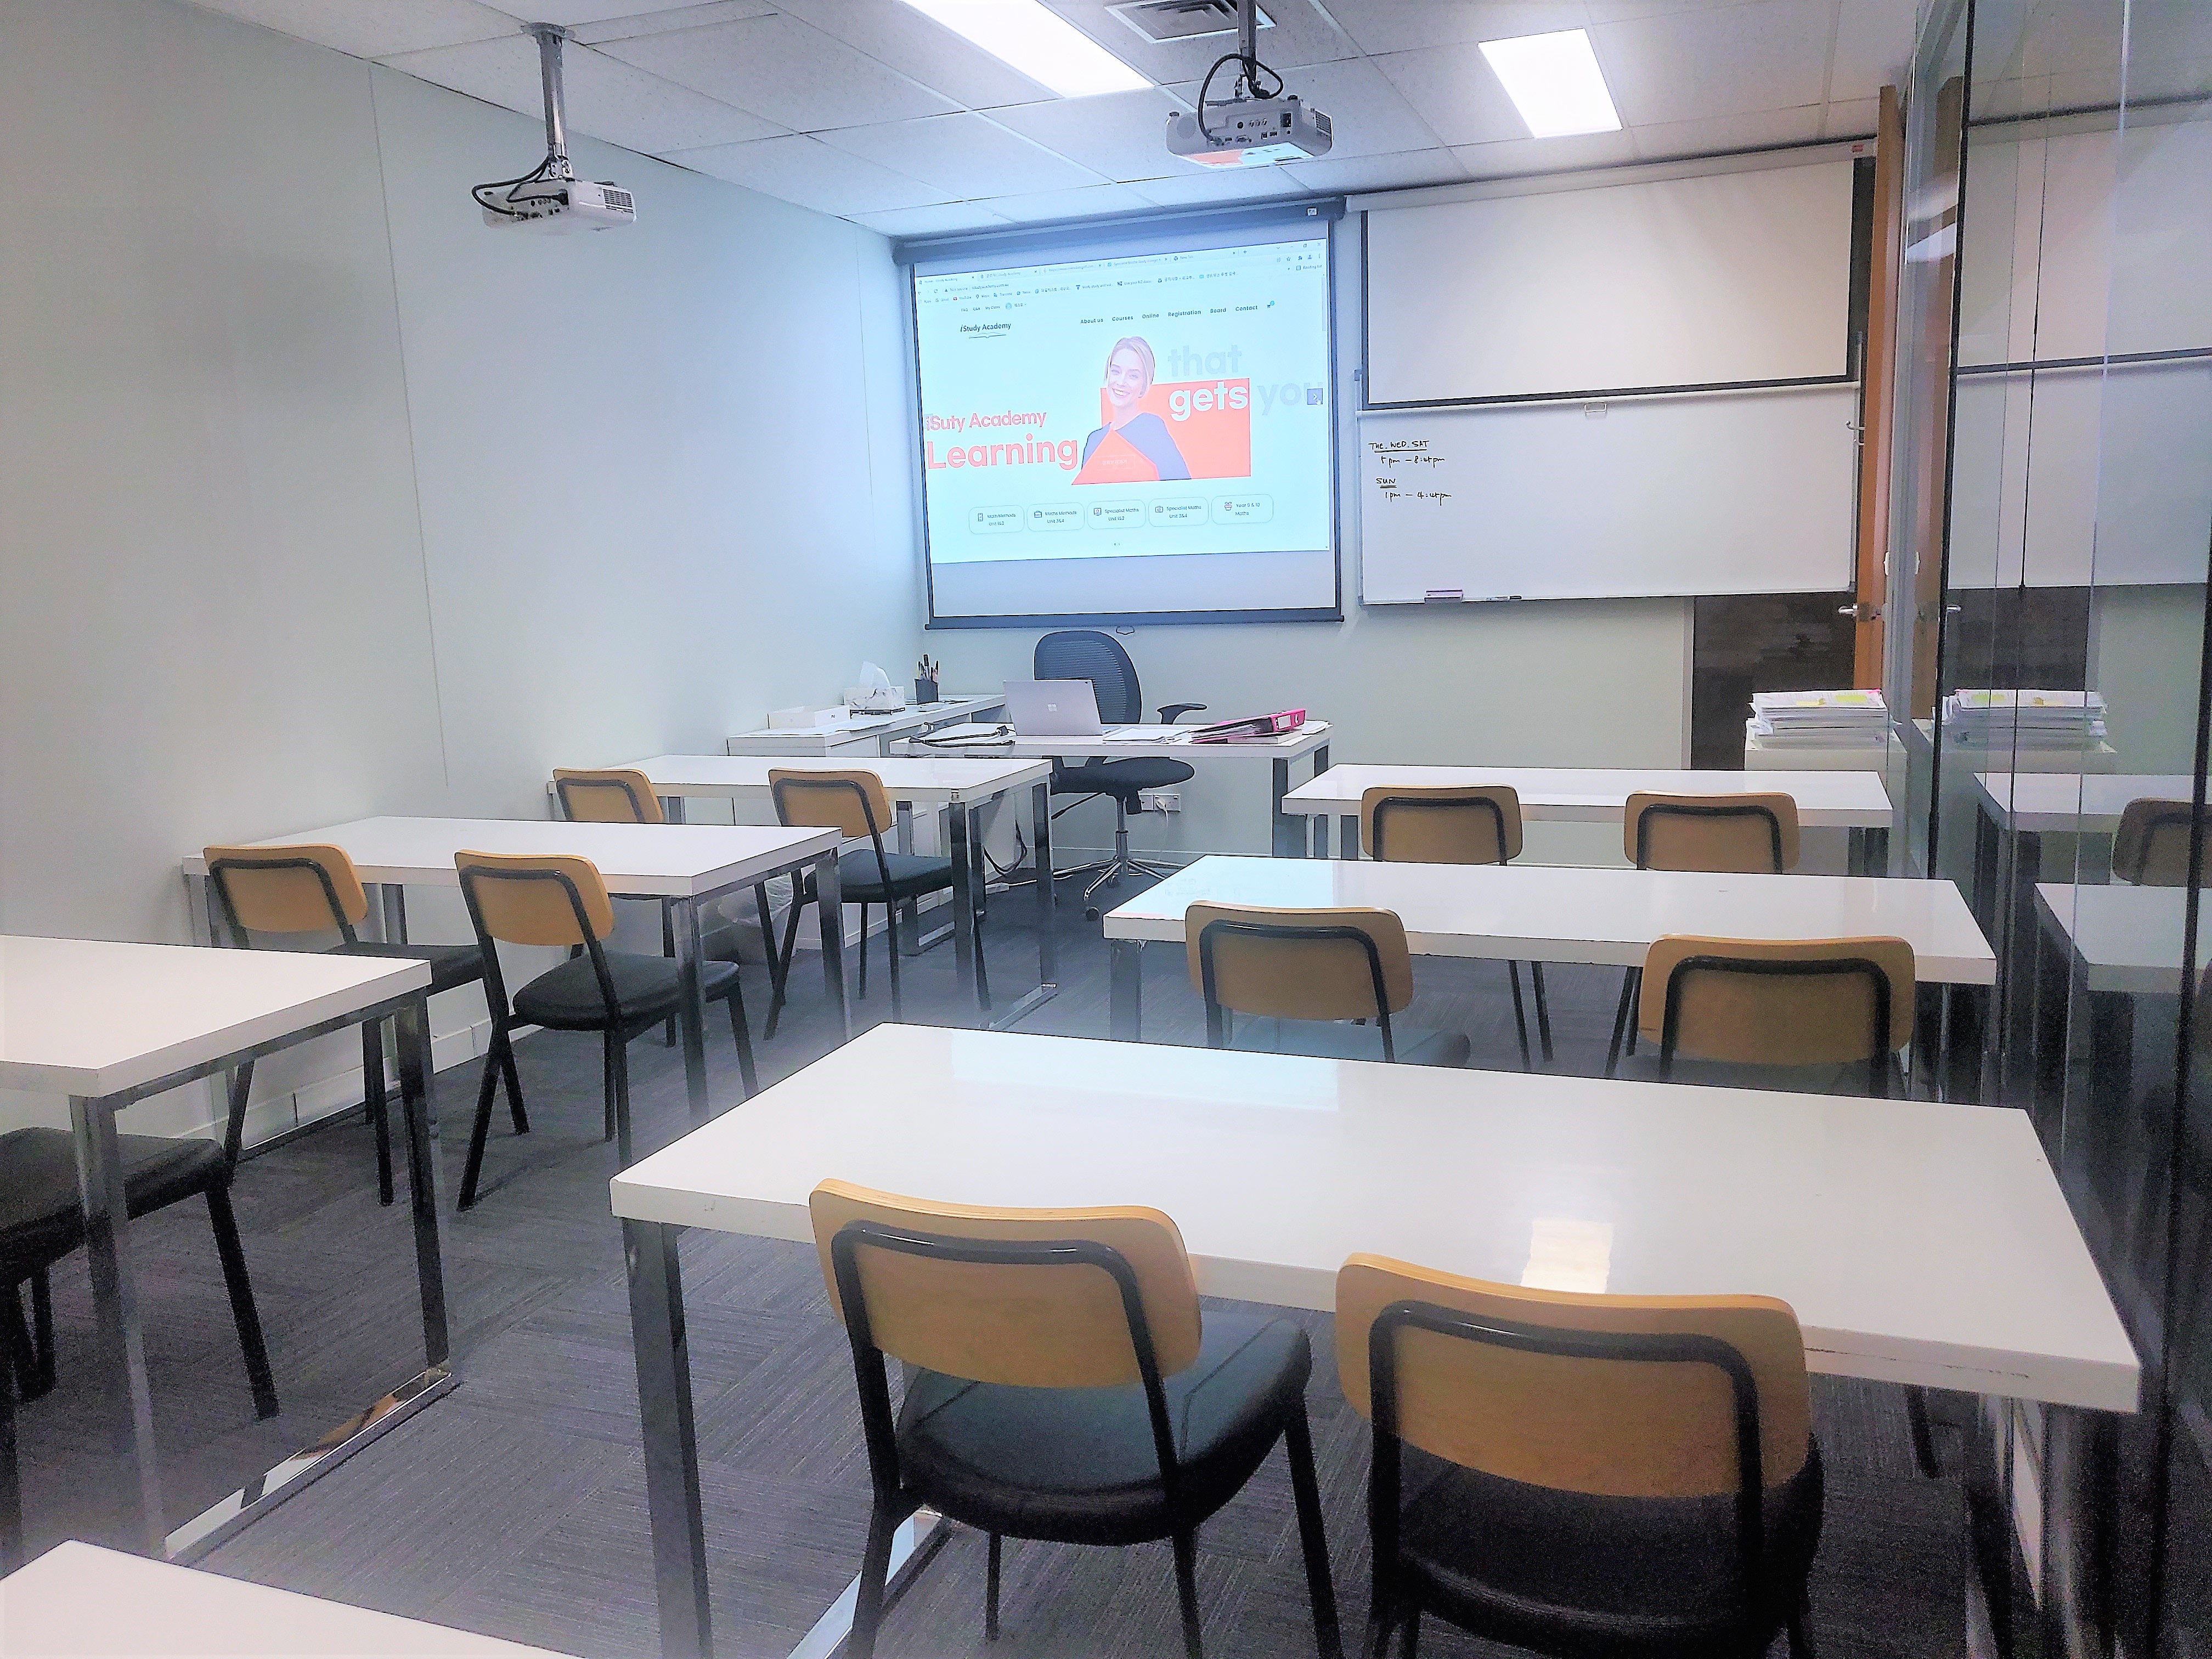 Main lecture room